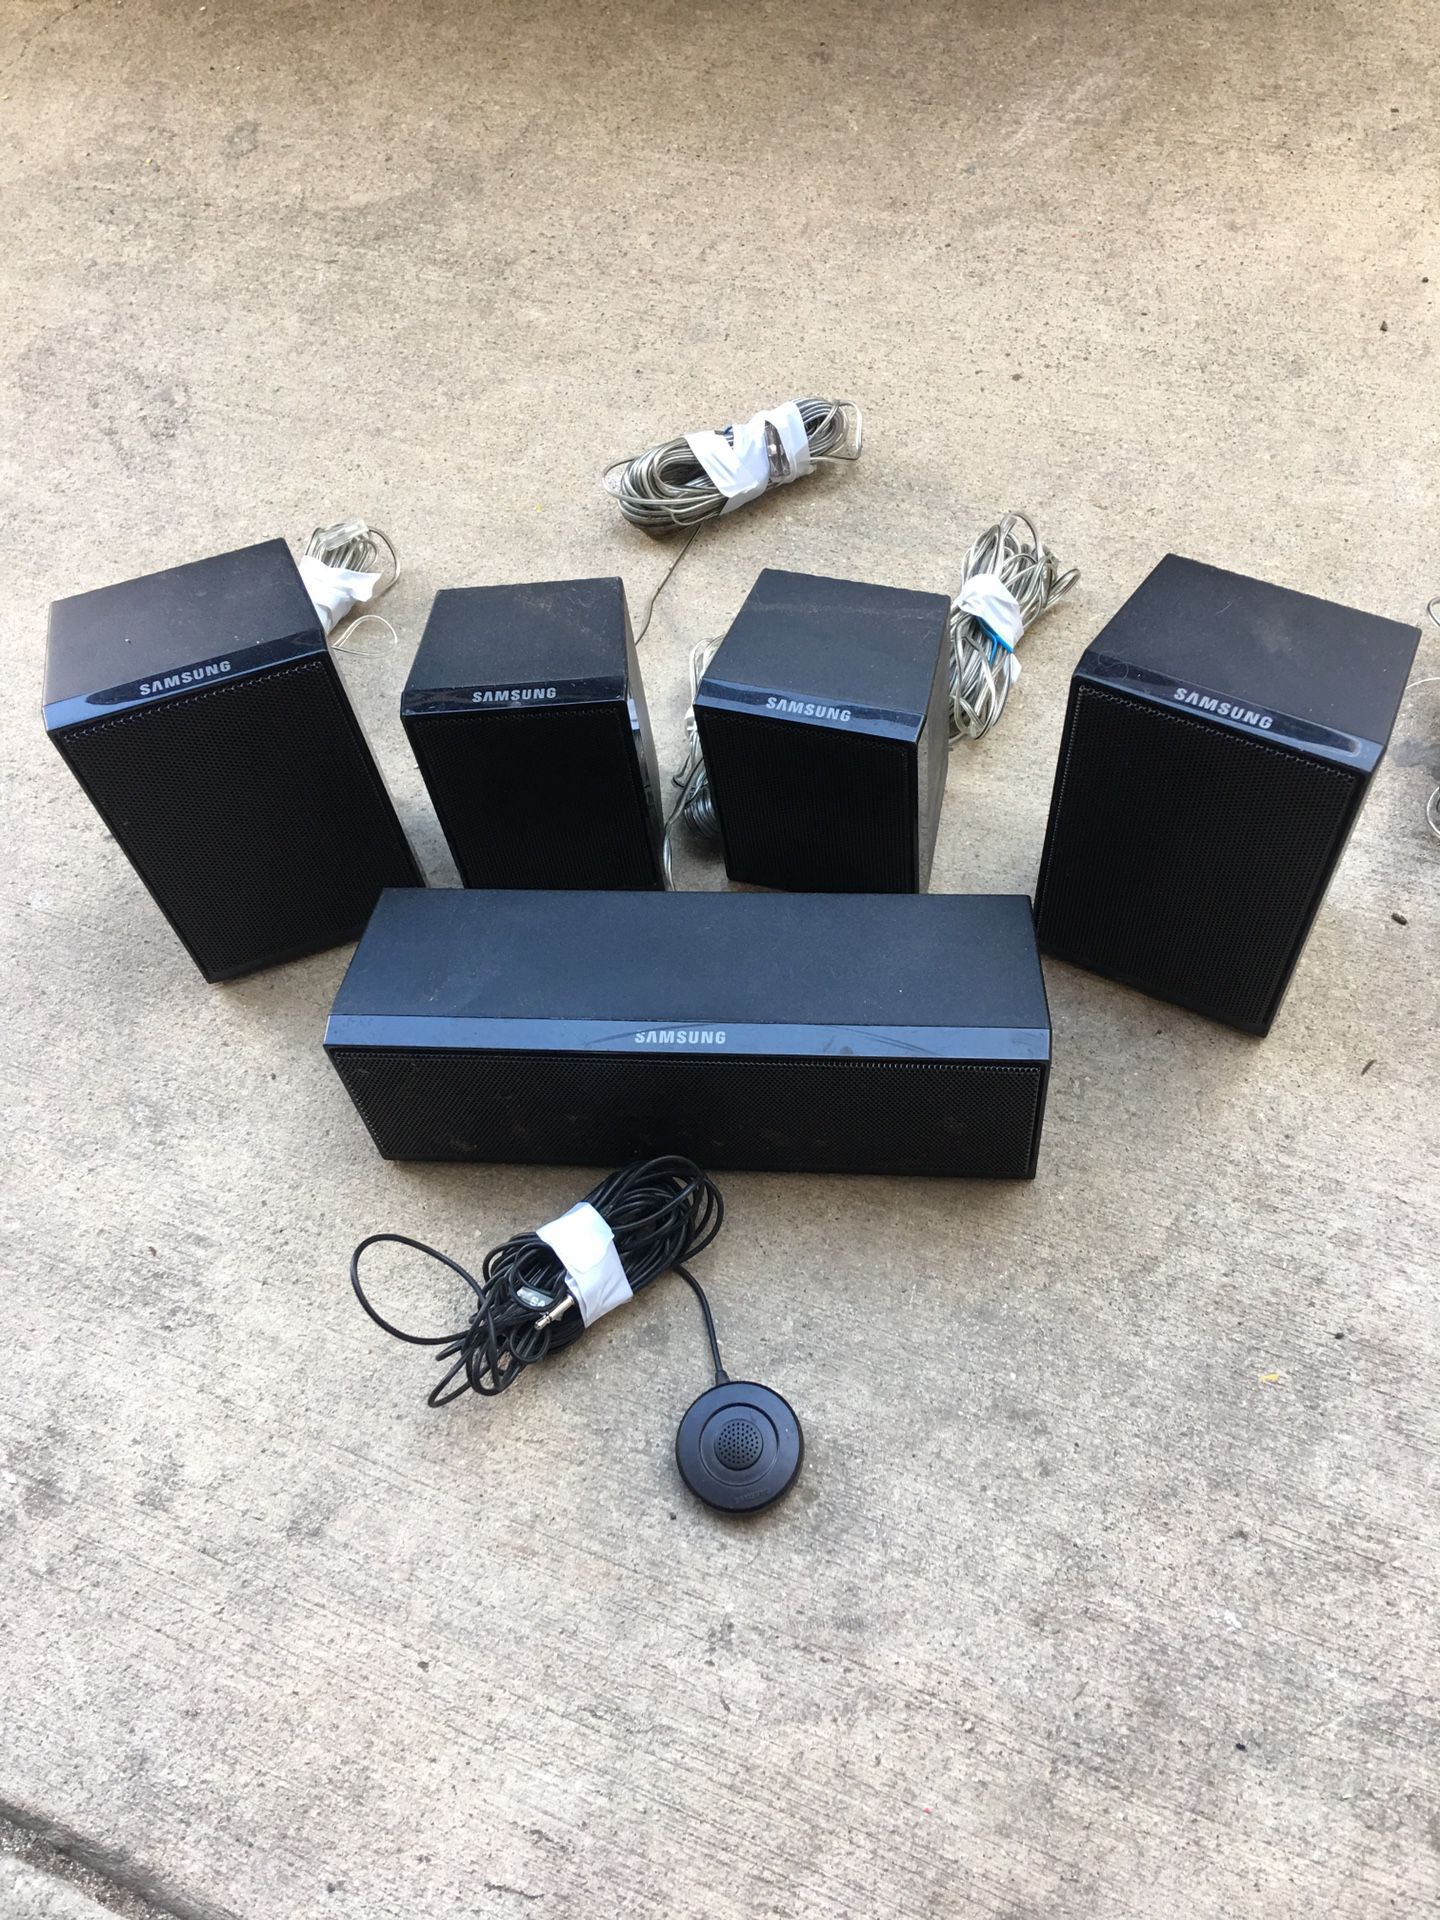 Used Samsung computer surround sound speaker all for 25